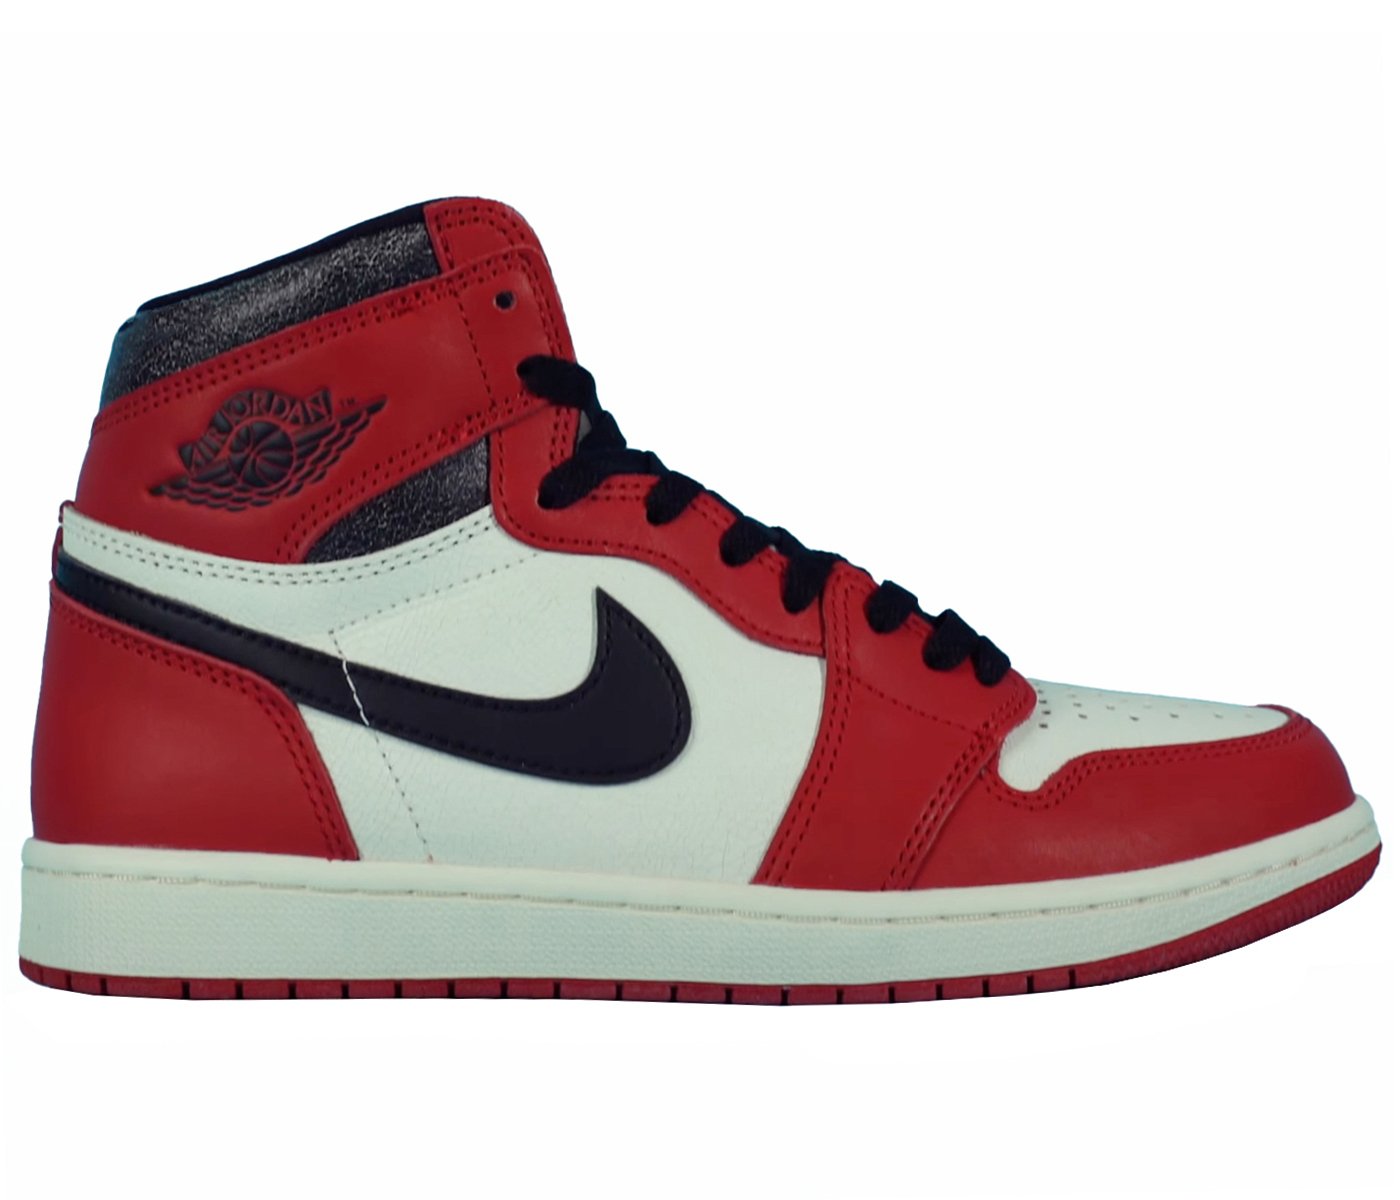 Jordan 1 Retro High OG Lost and Found sneakers